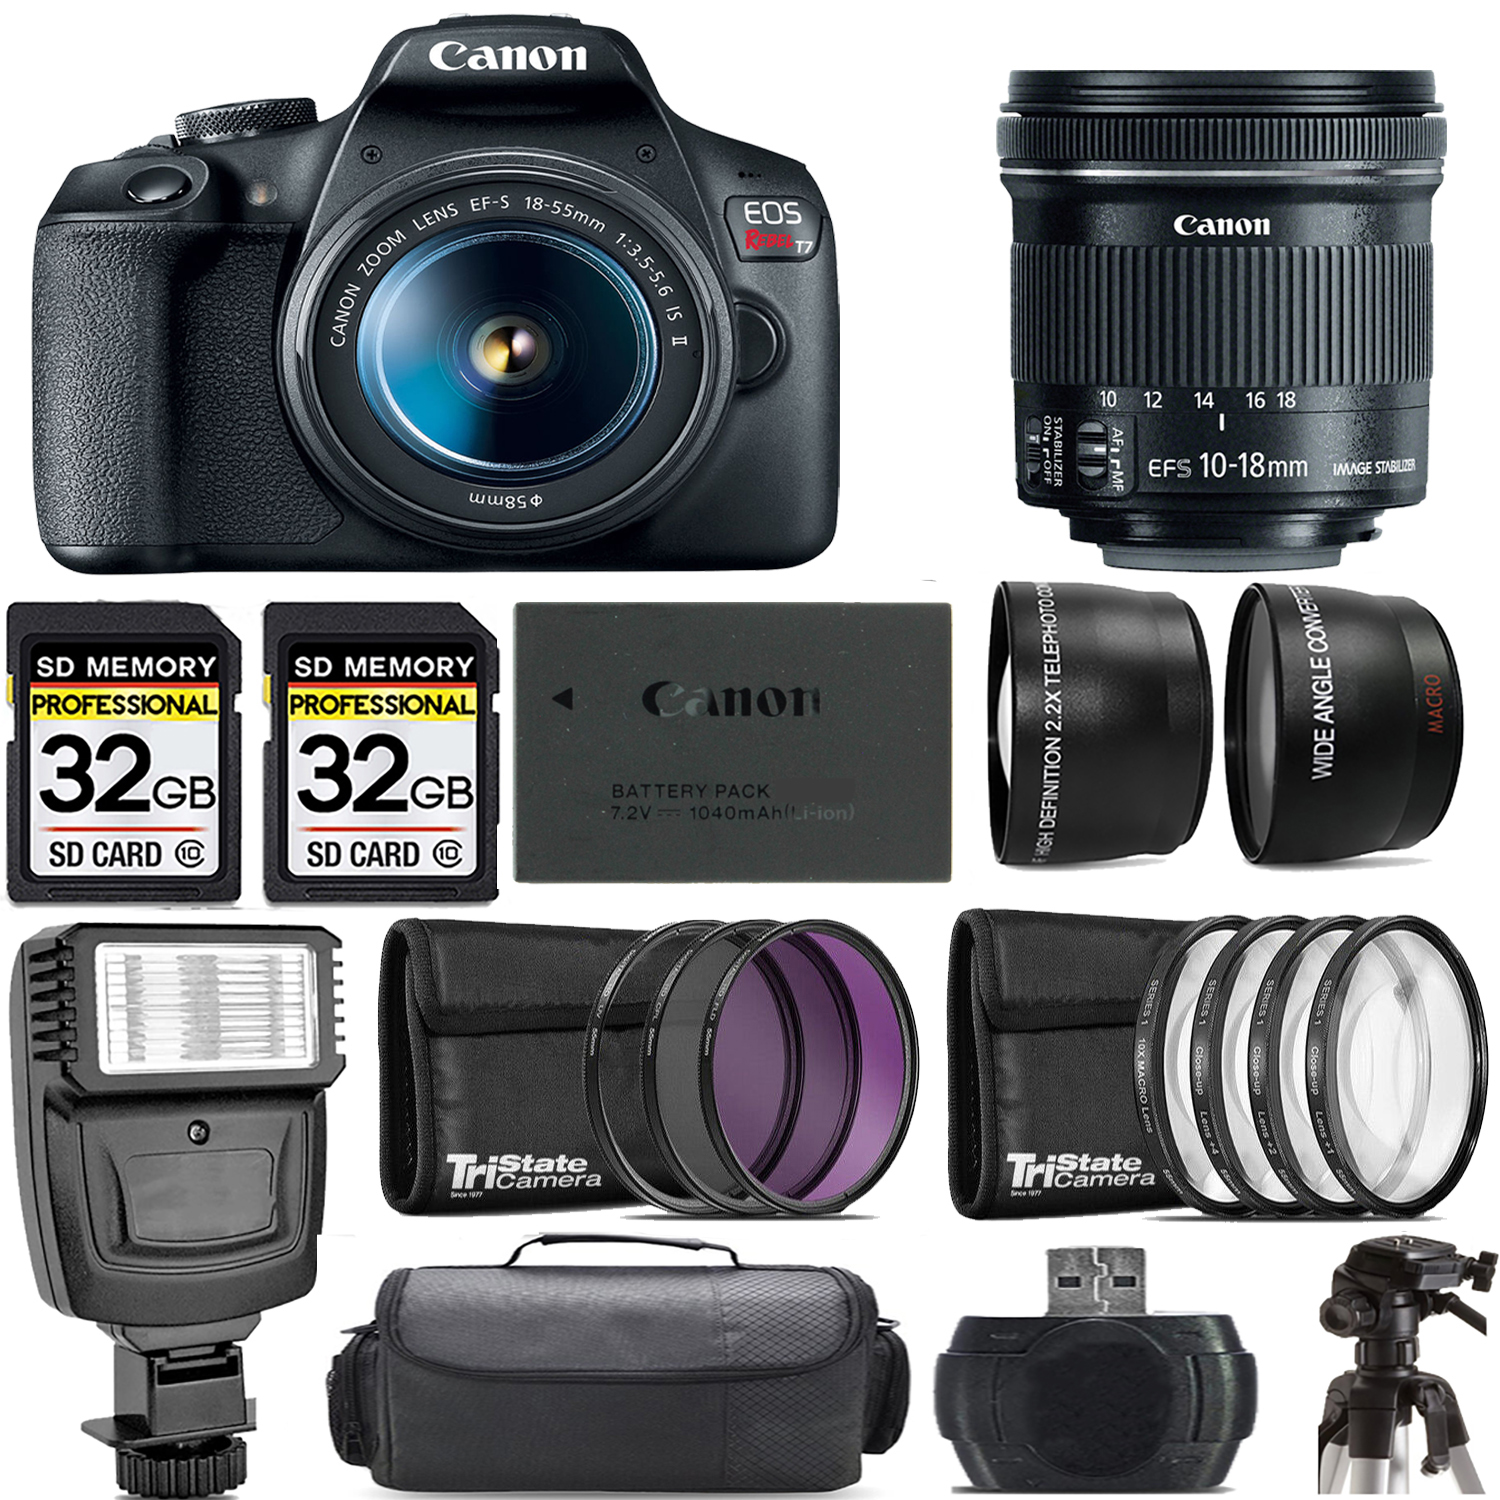 EOS Rebel T7 with 18-55mm Lens + 10-18mm f/4.5-5.6 IS STM Lens + Flash - Kit *FREE SHIPPING*